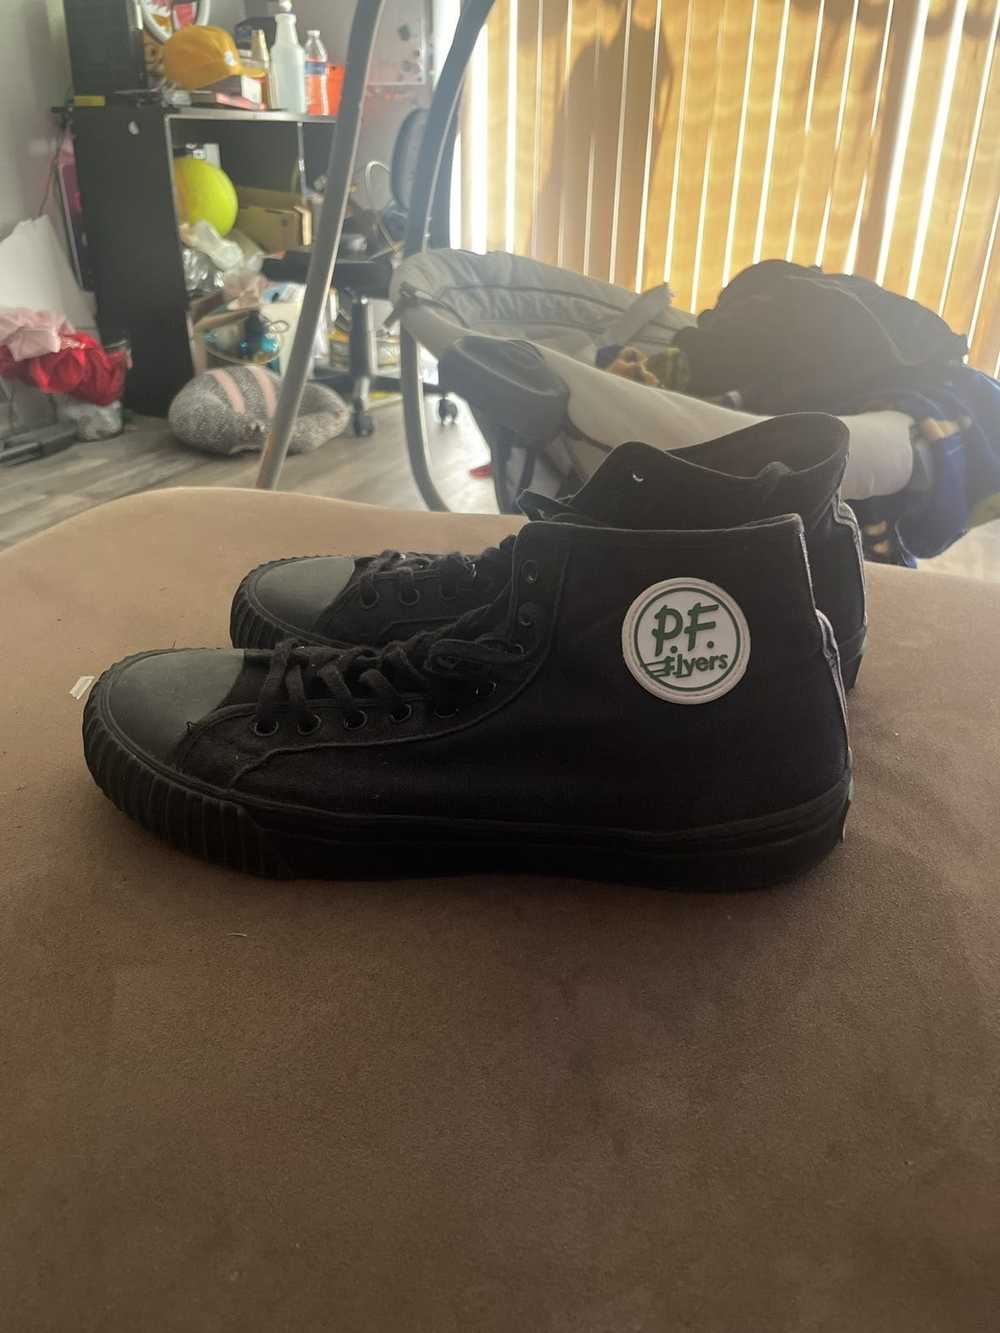 Pf Flyers P.f. Flyers - image 1